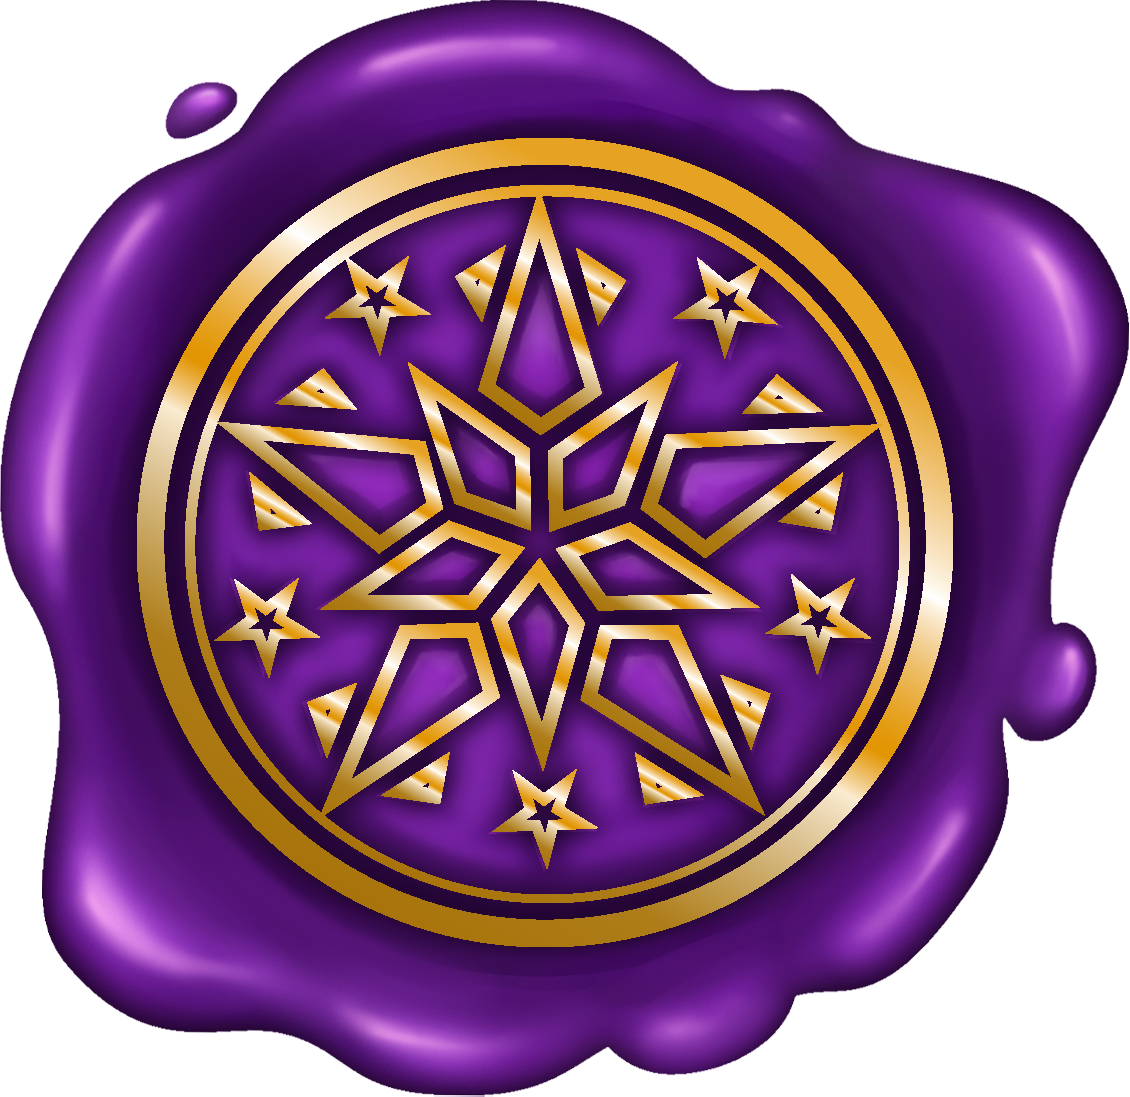 A purple wax stamp with a golden interior pattern.